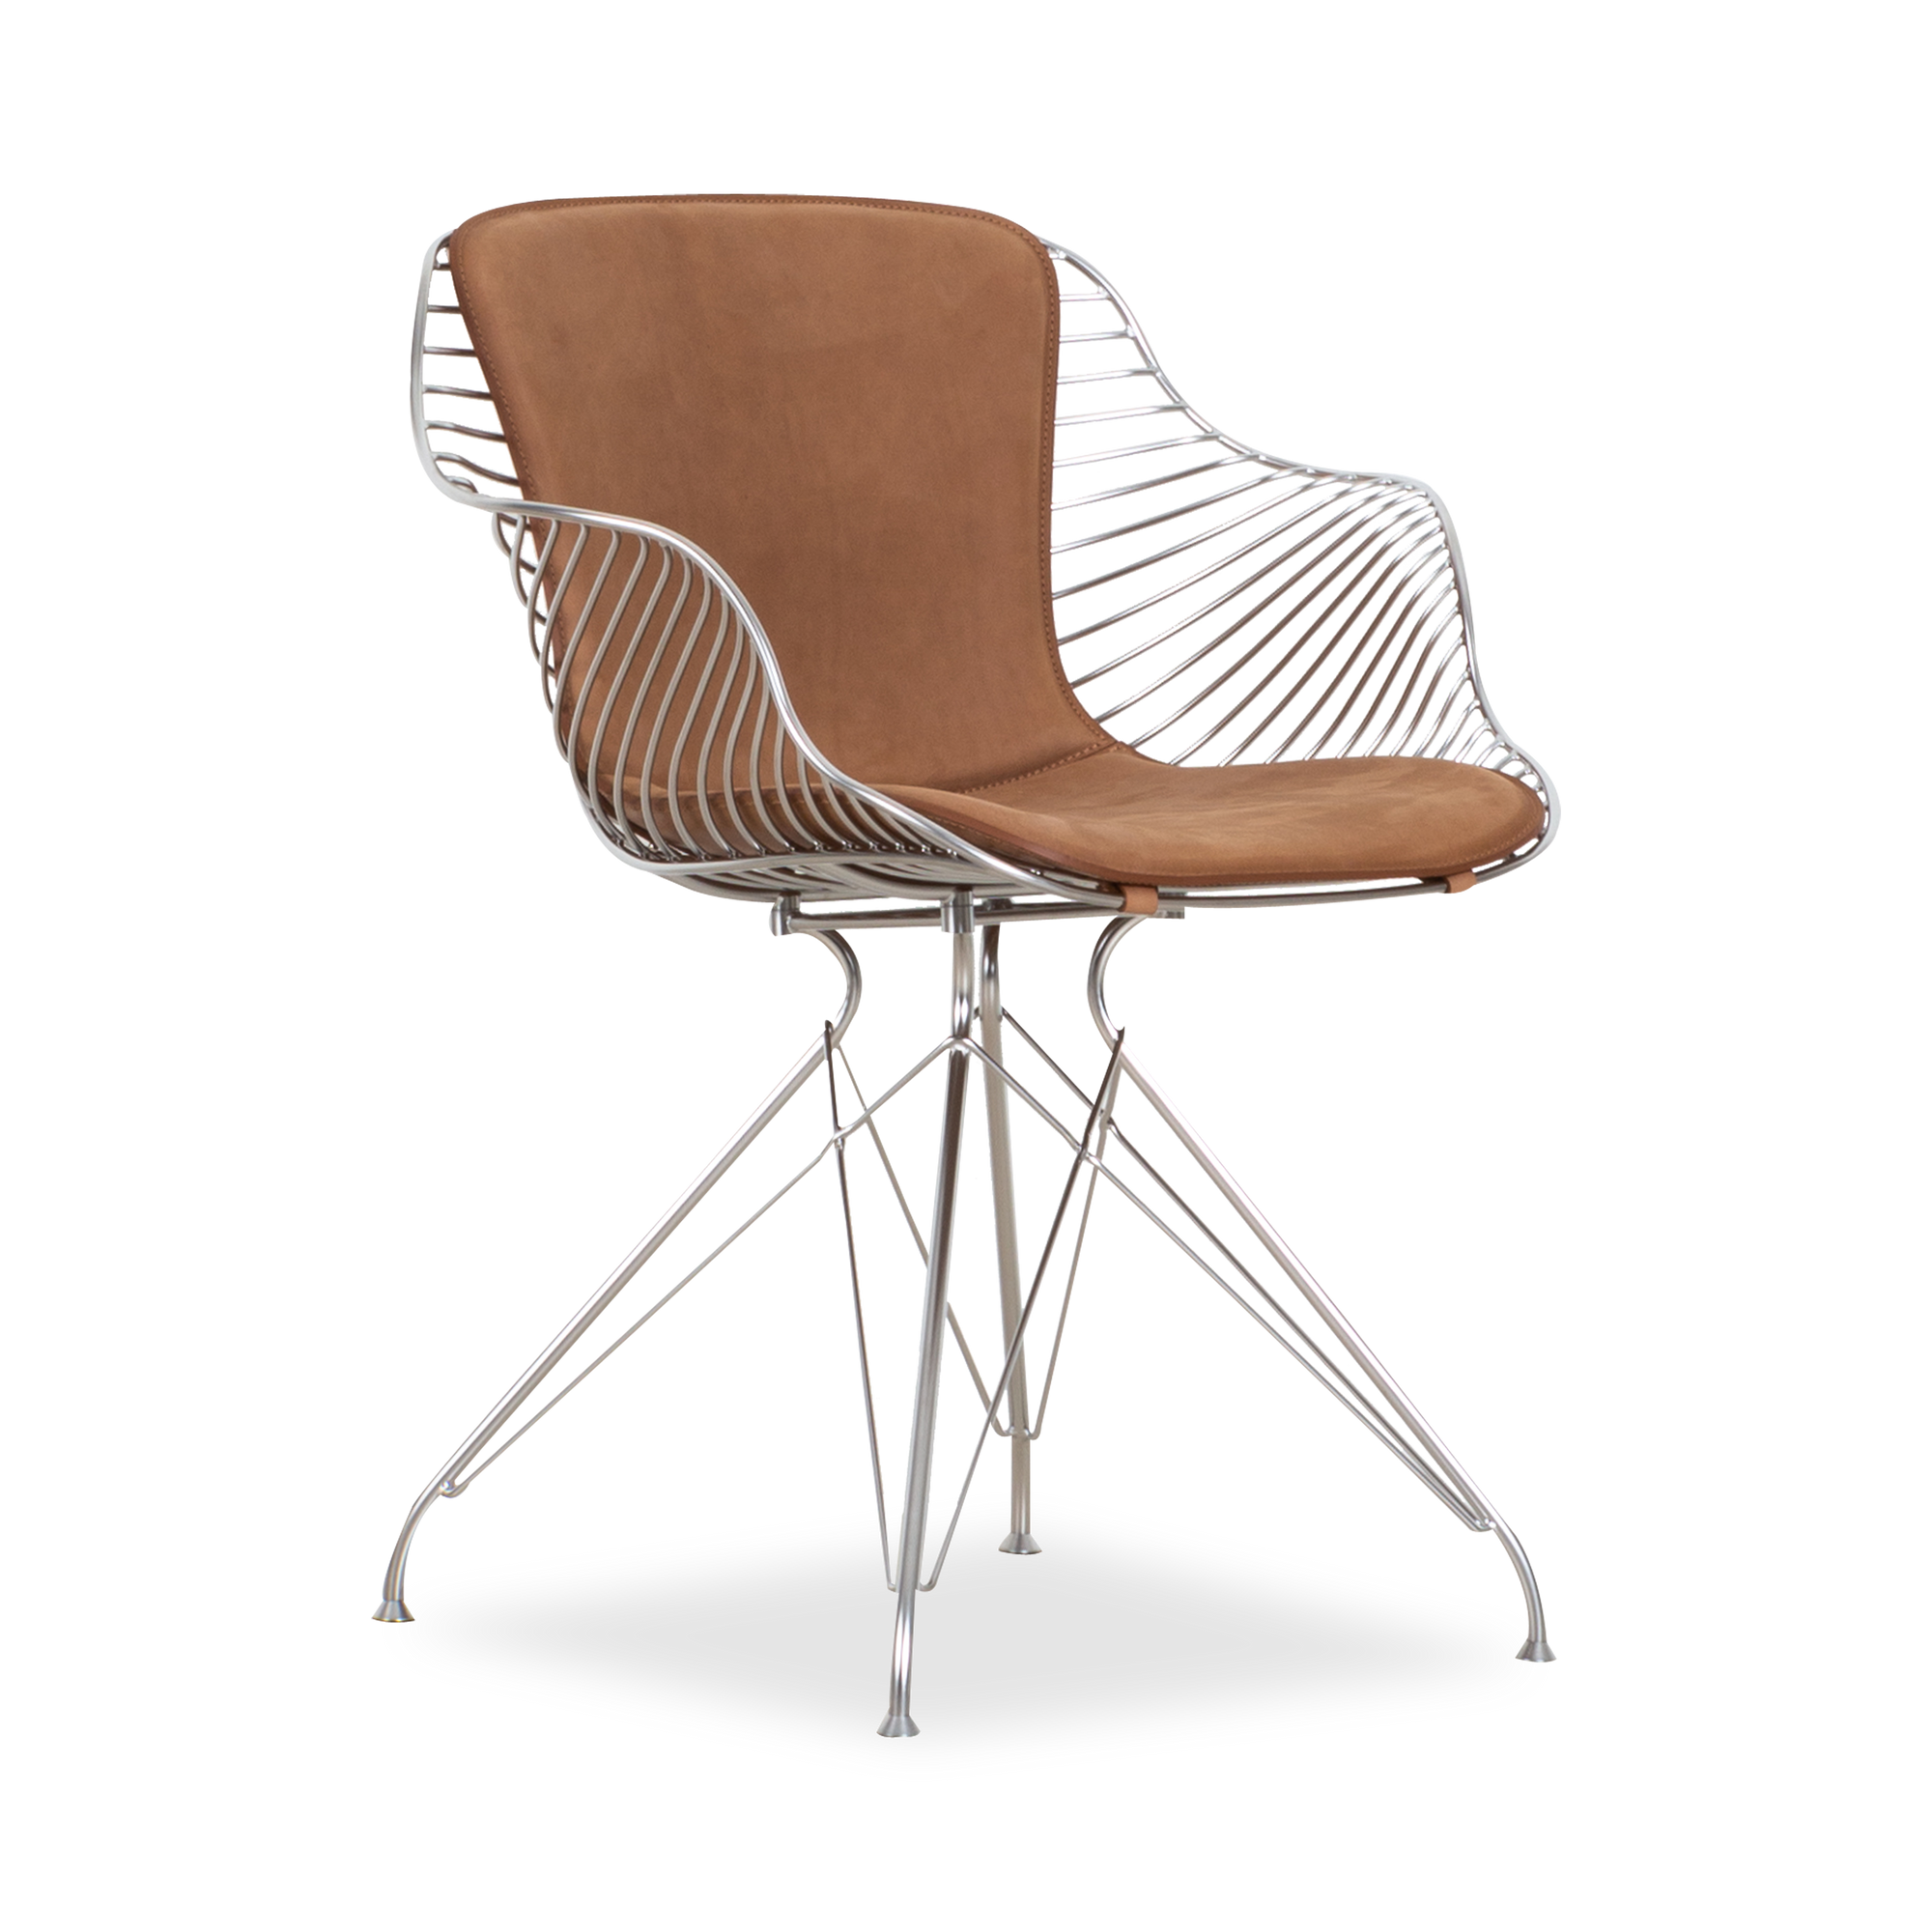 Merging abstract and minimalist design, the Wire Dining Chair was inspired by combining two traditional forms of highly-detailed and skilled craftsmanship - saddle-making and preci